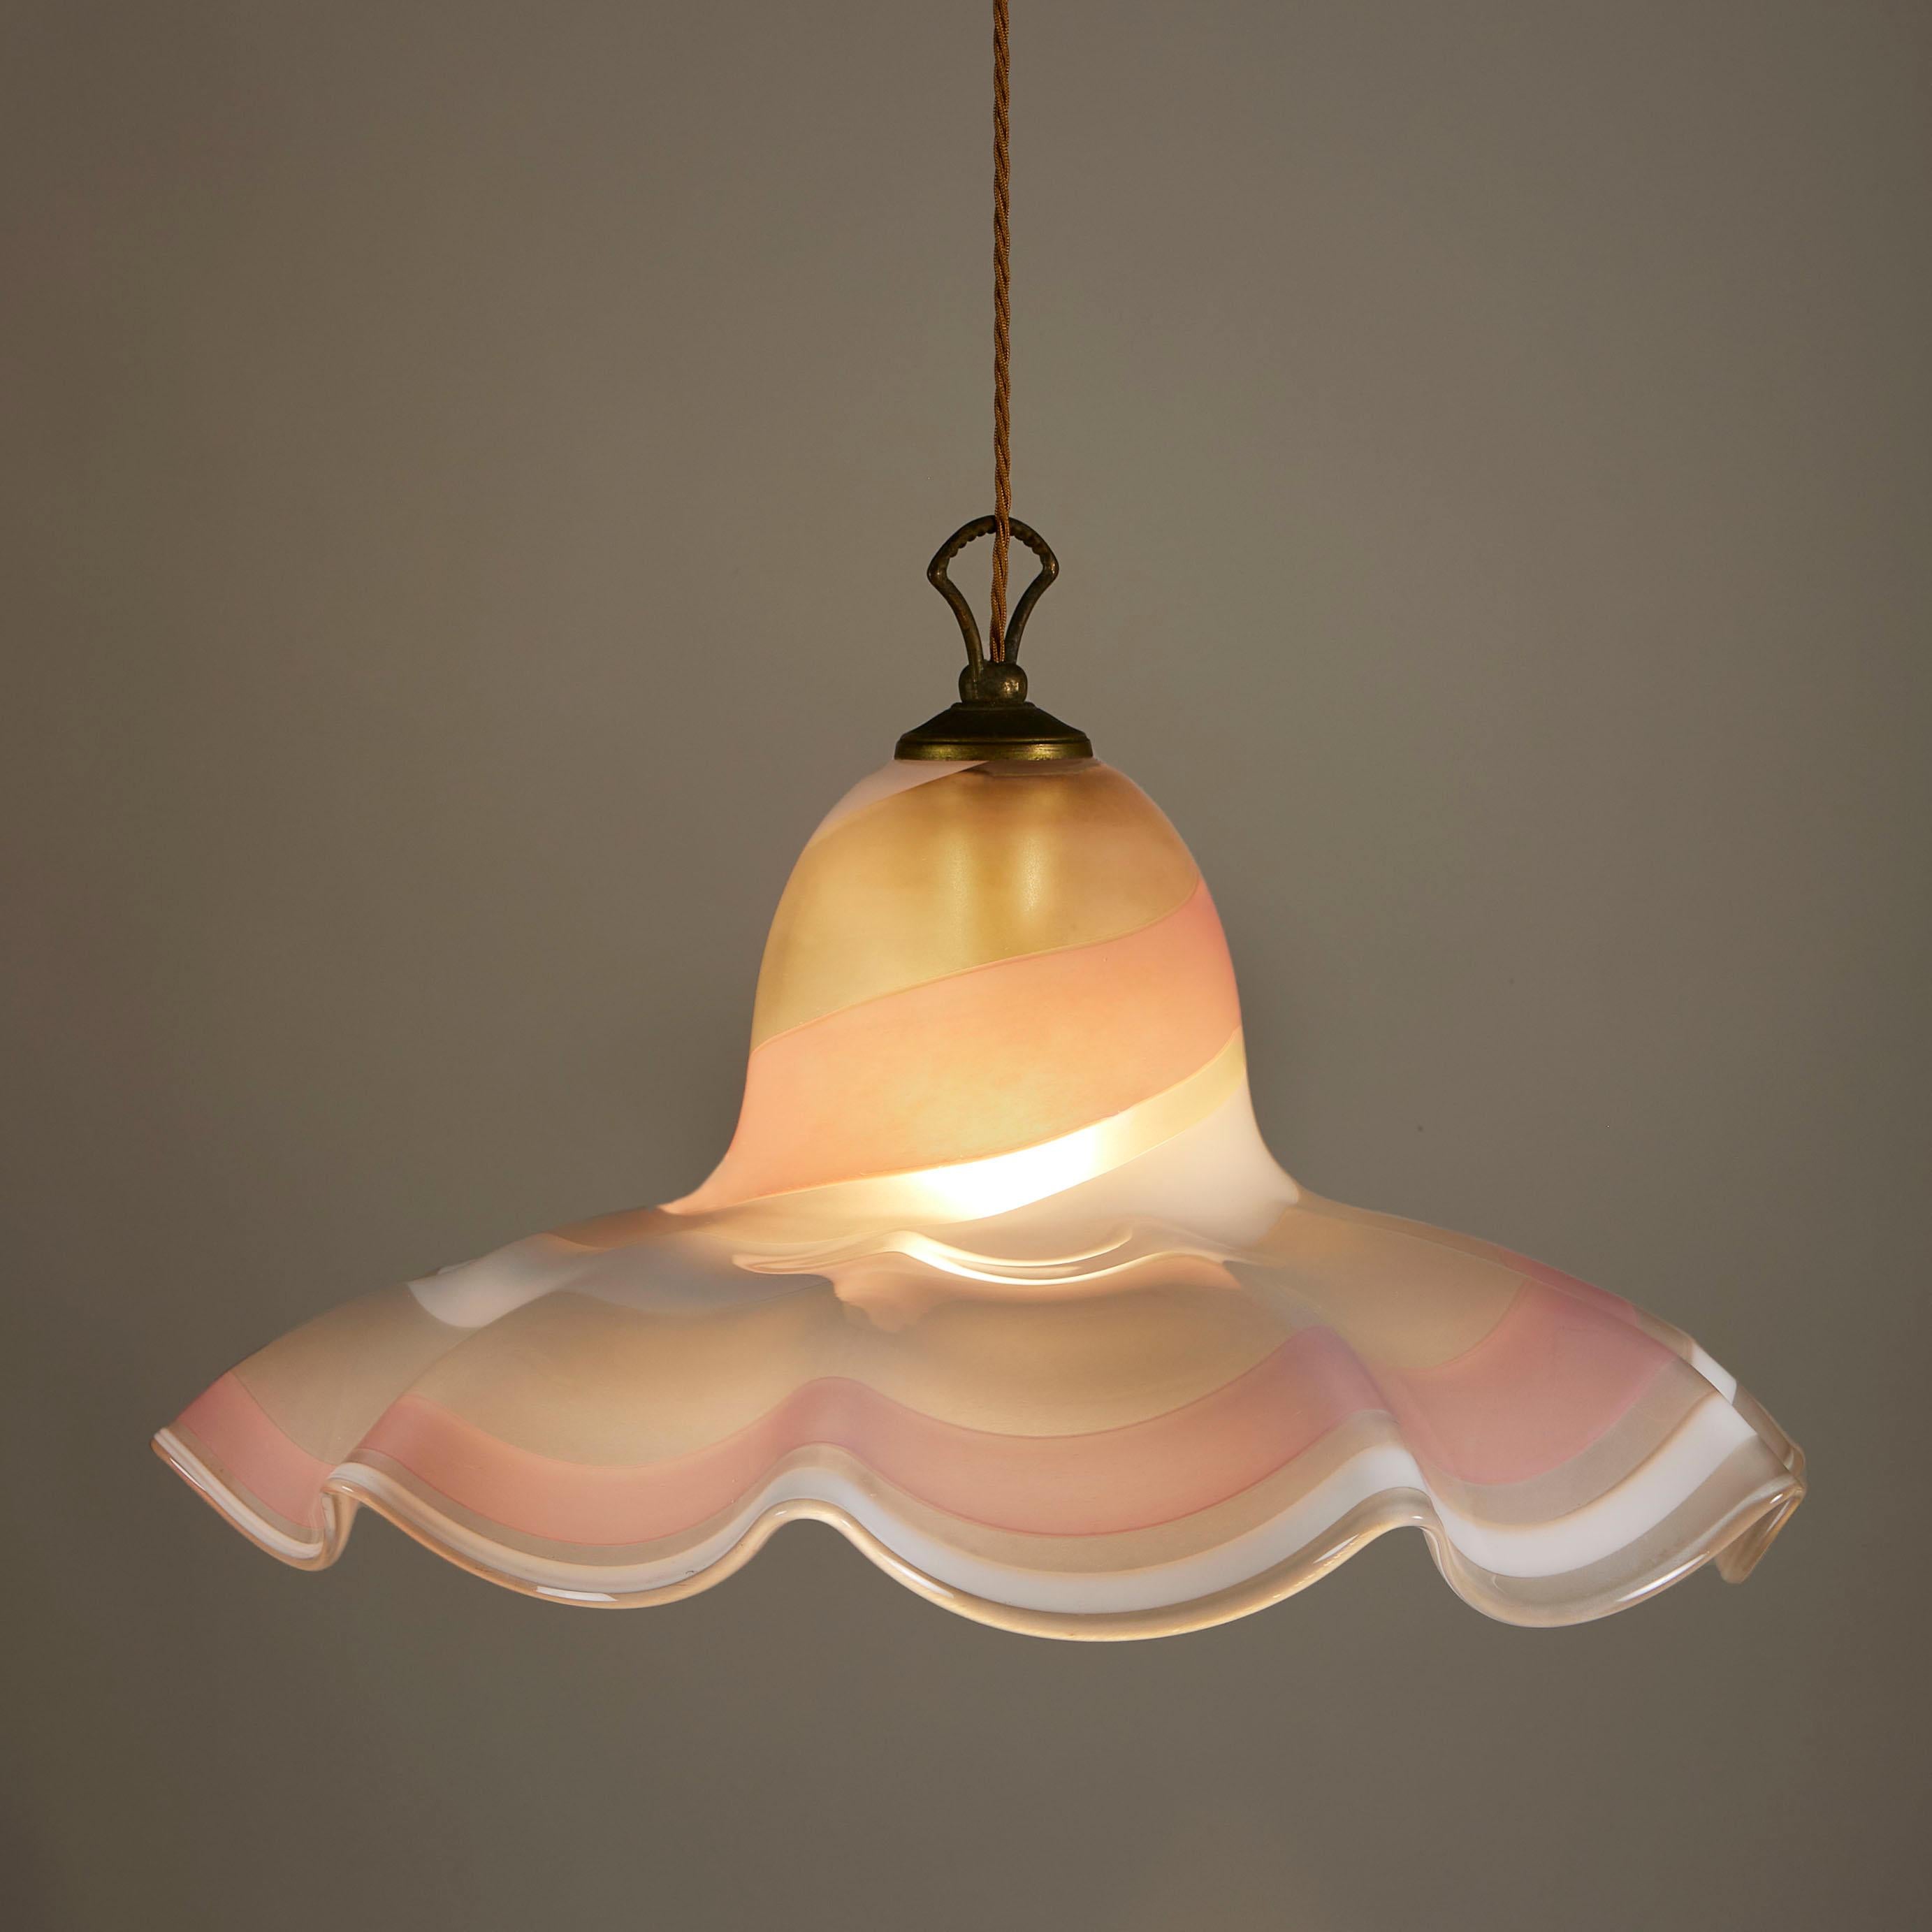 Elegant large Murano chandelier that feels soft and delicate both in the colour combination of pink, white and cream swirls and the traditional Italian handkerchief shape. Finished with brass hardware.
